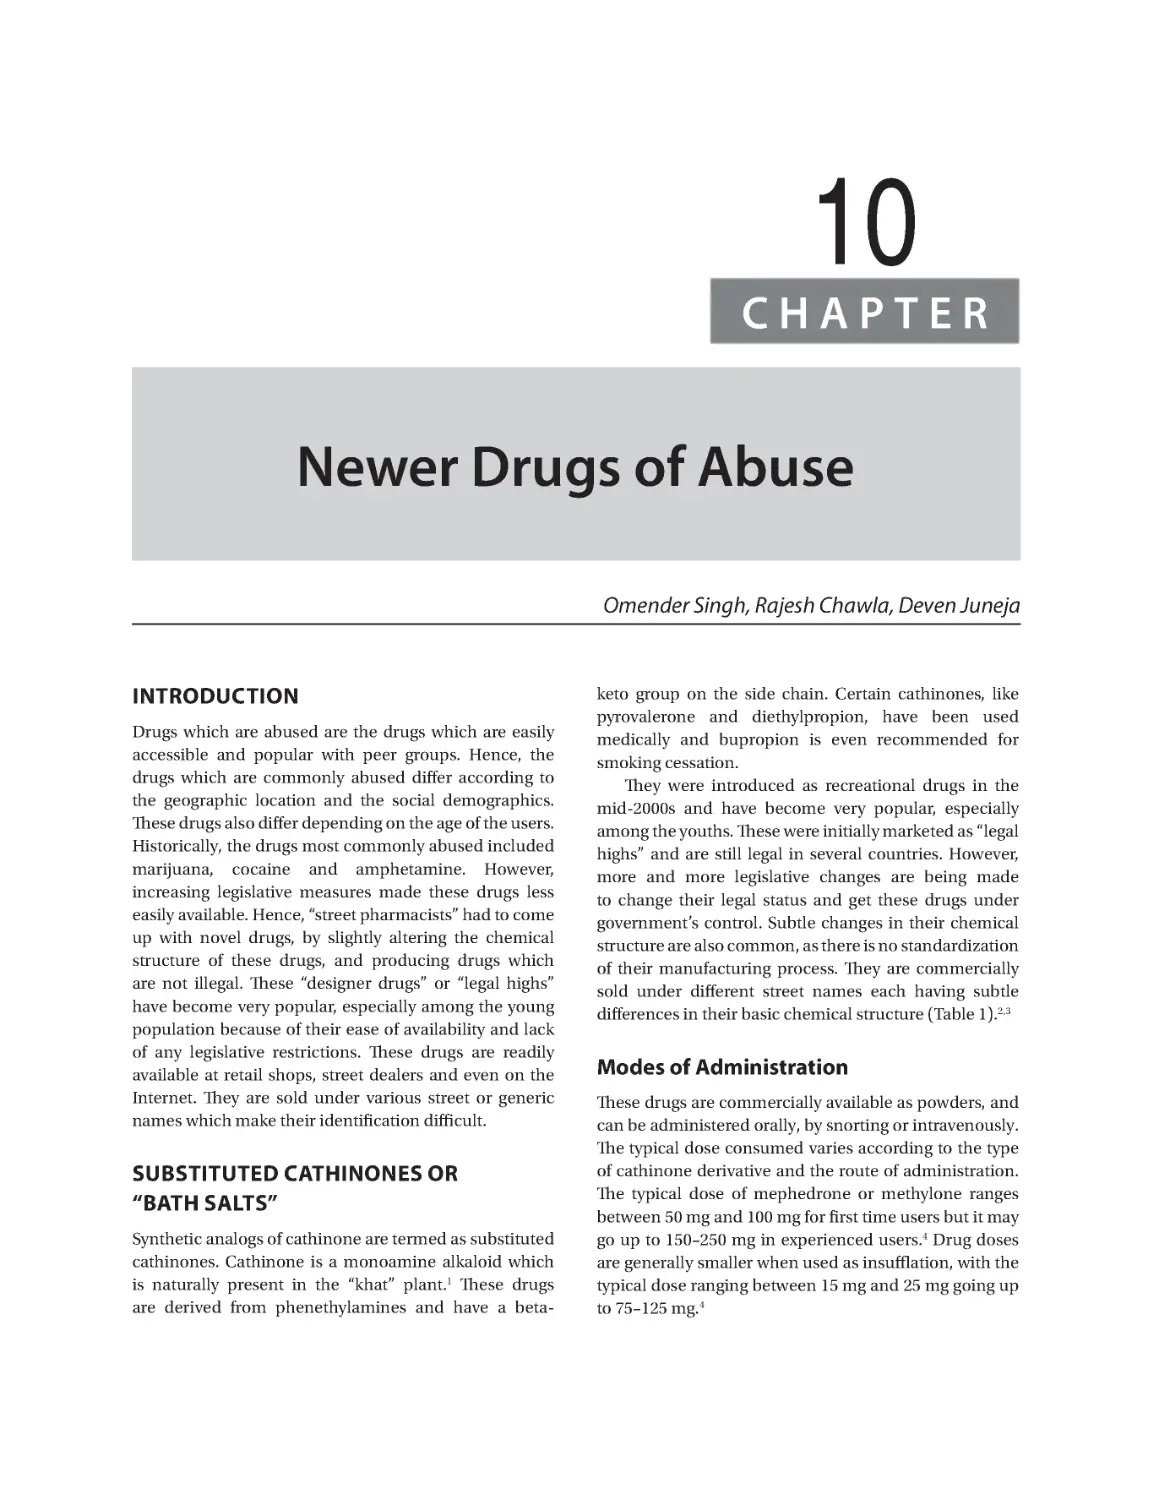 Chapter 10: Newer Drugs of Abuse